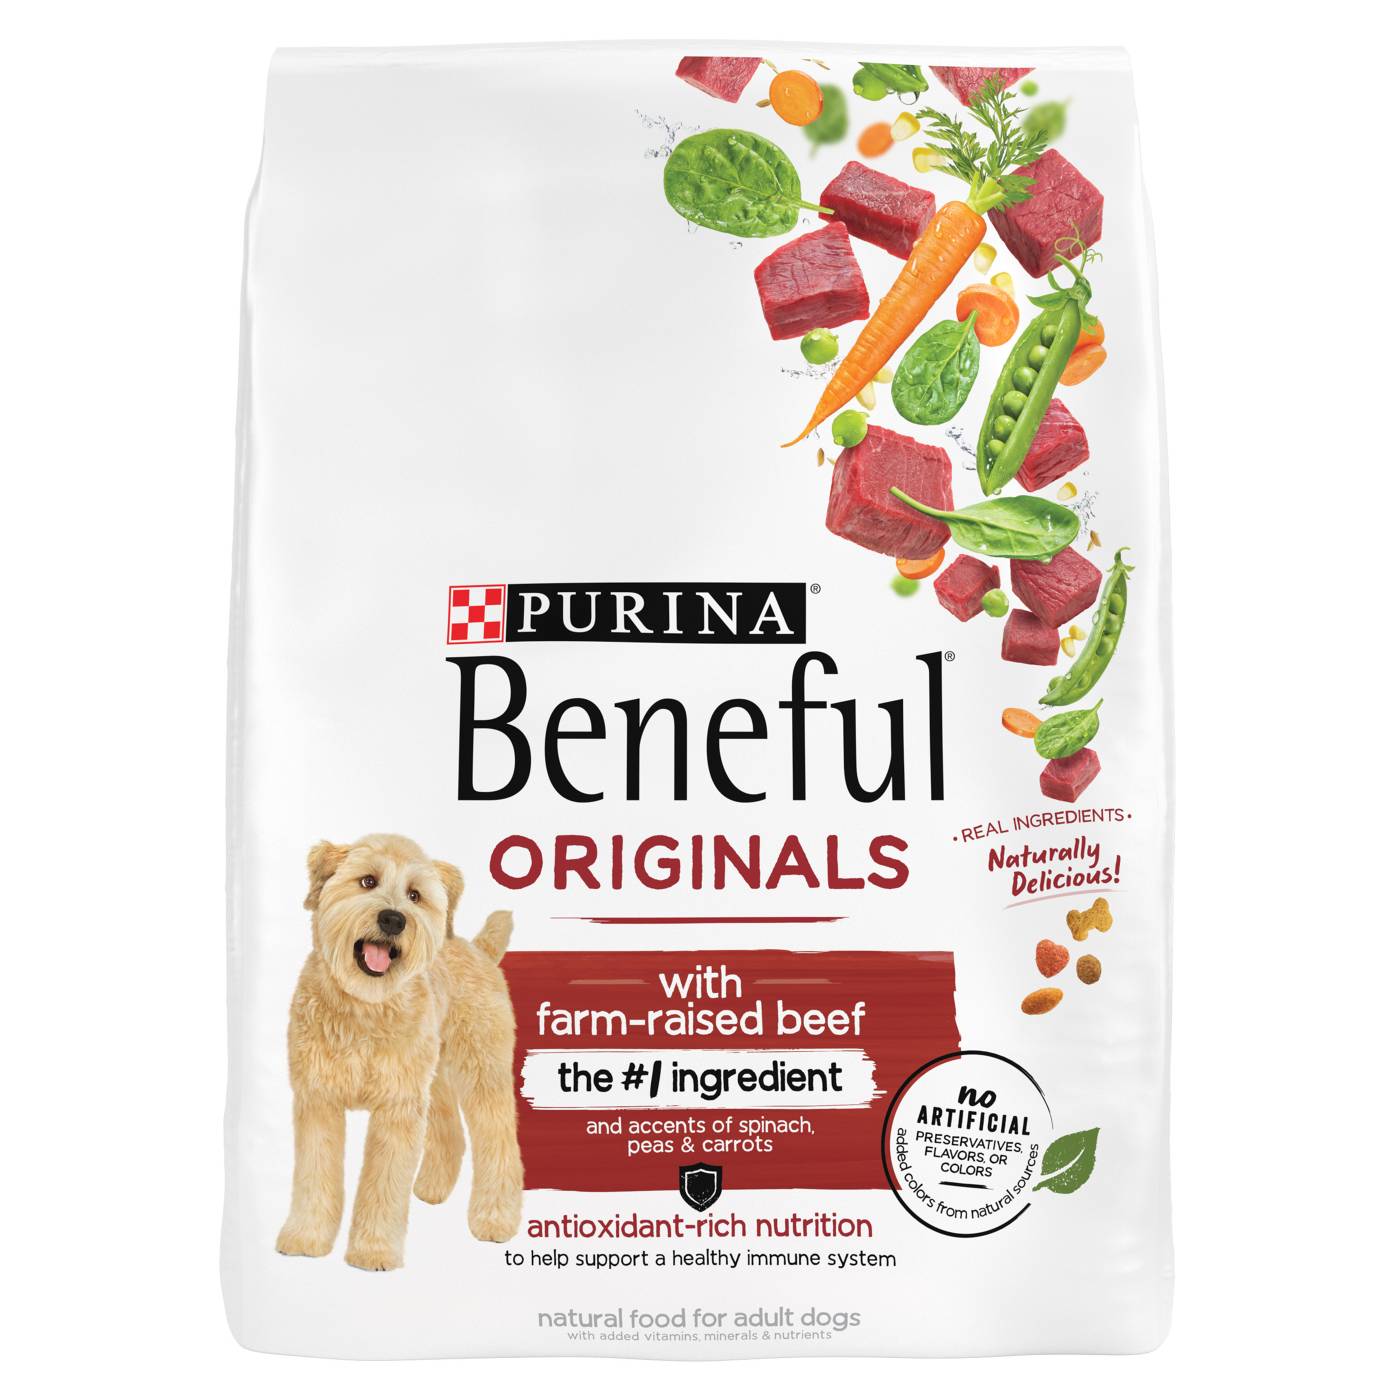 Beneful Purina Beneful Originals With Farm-Raised Beef, With Real Meat Dog Food; image 1 of 9